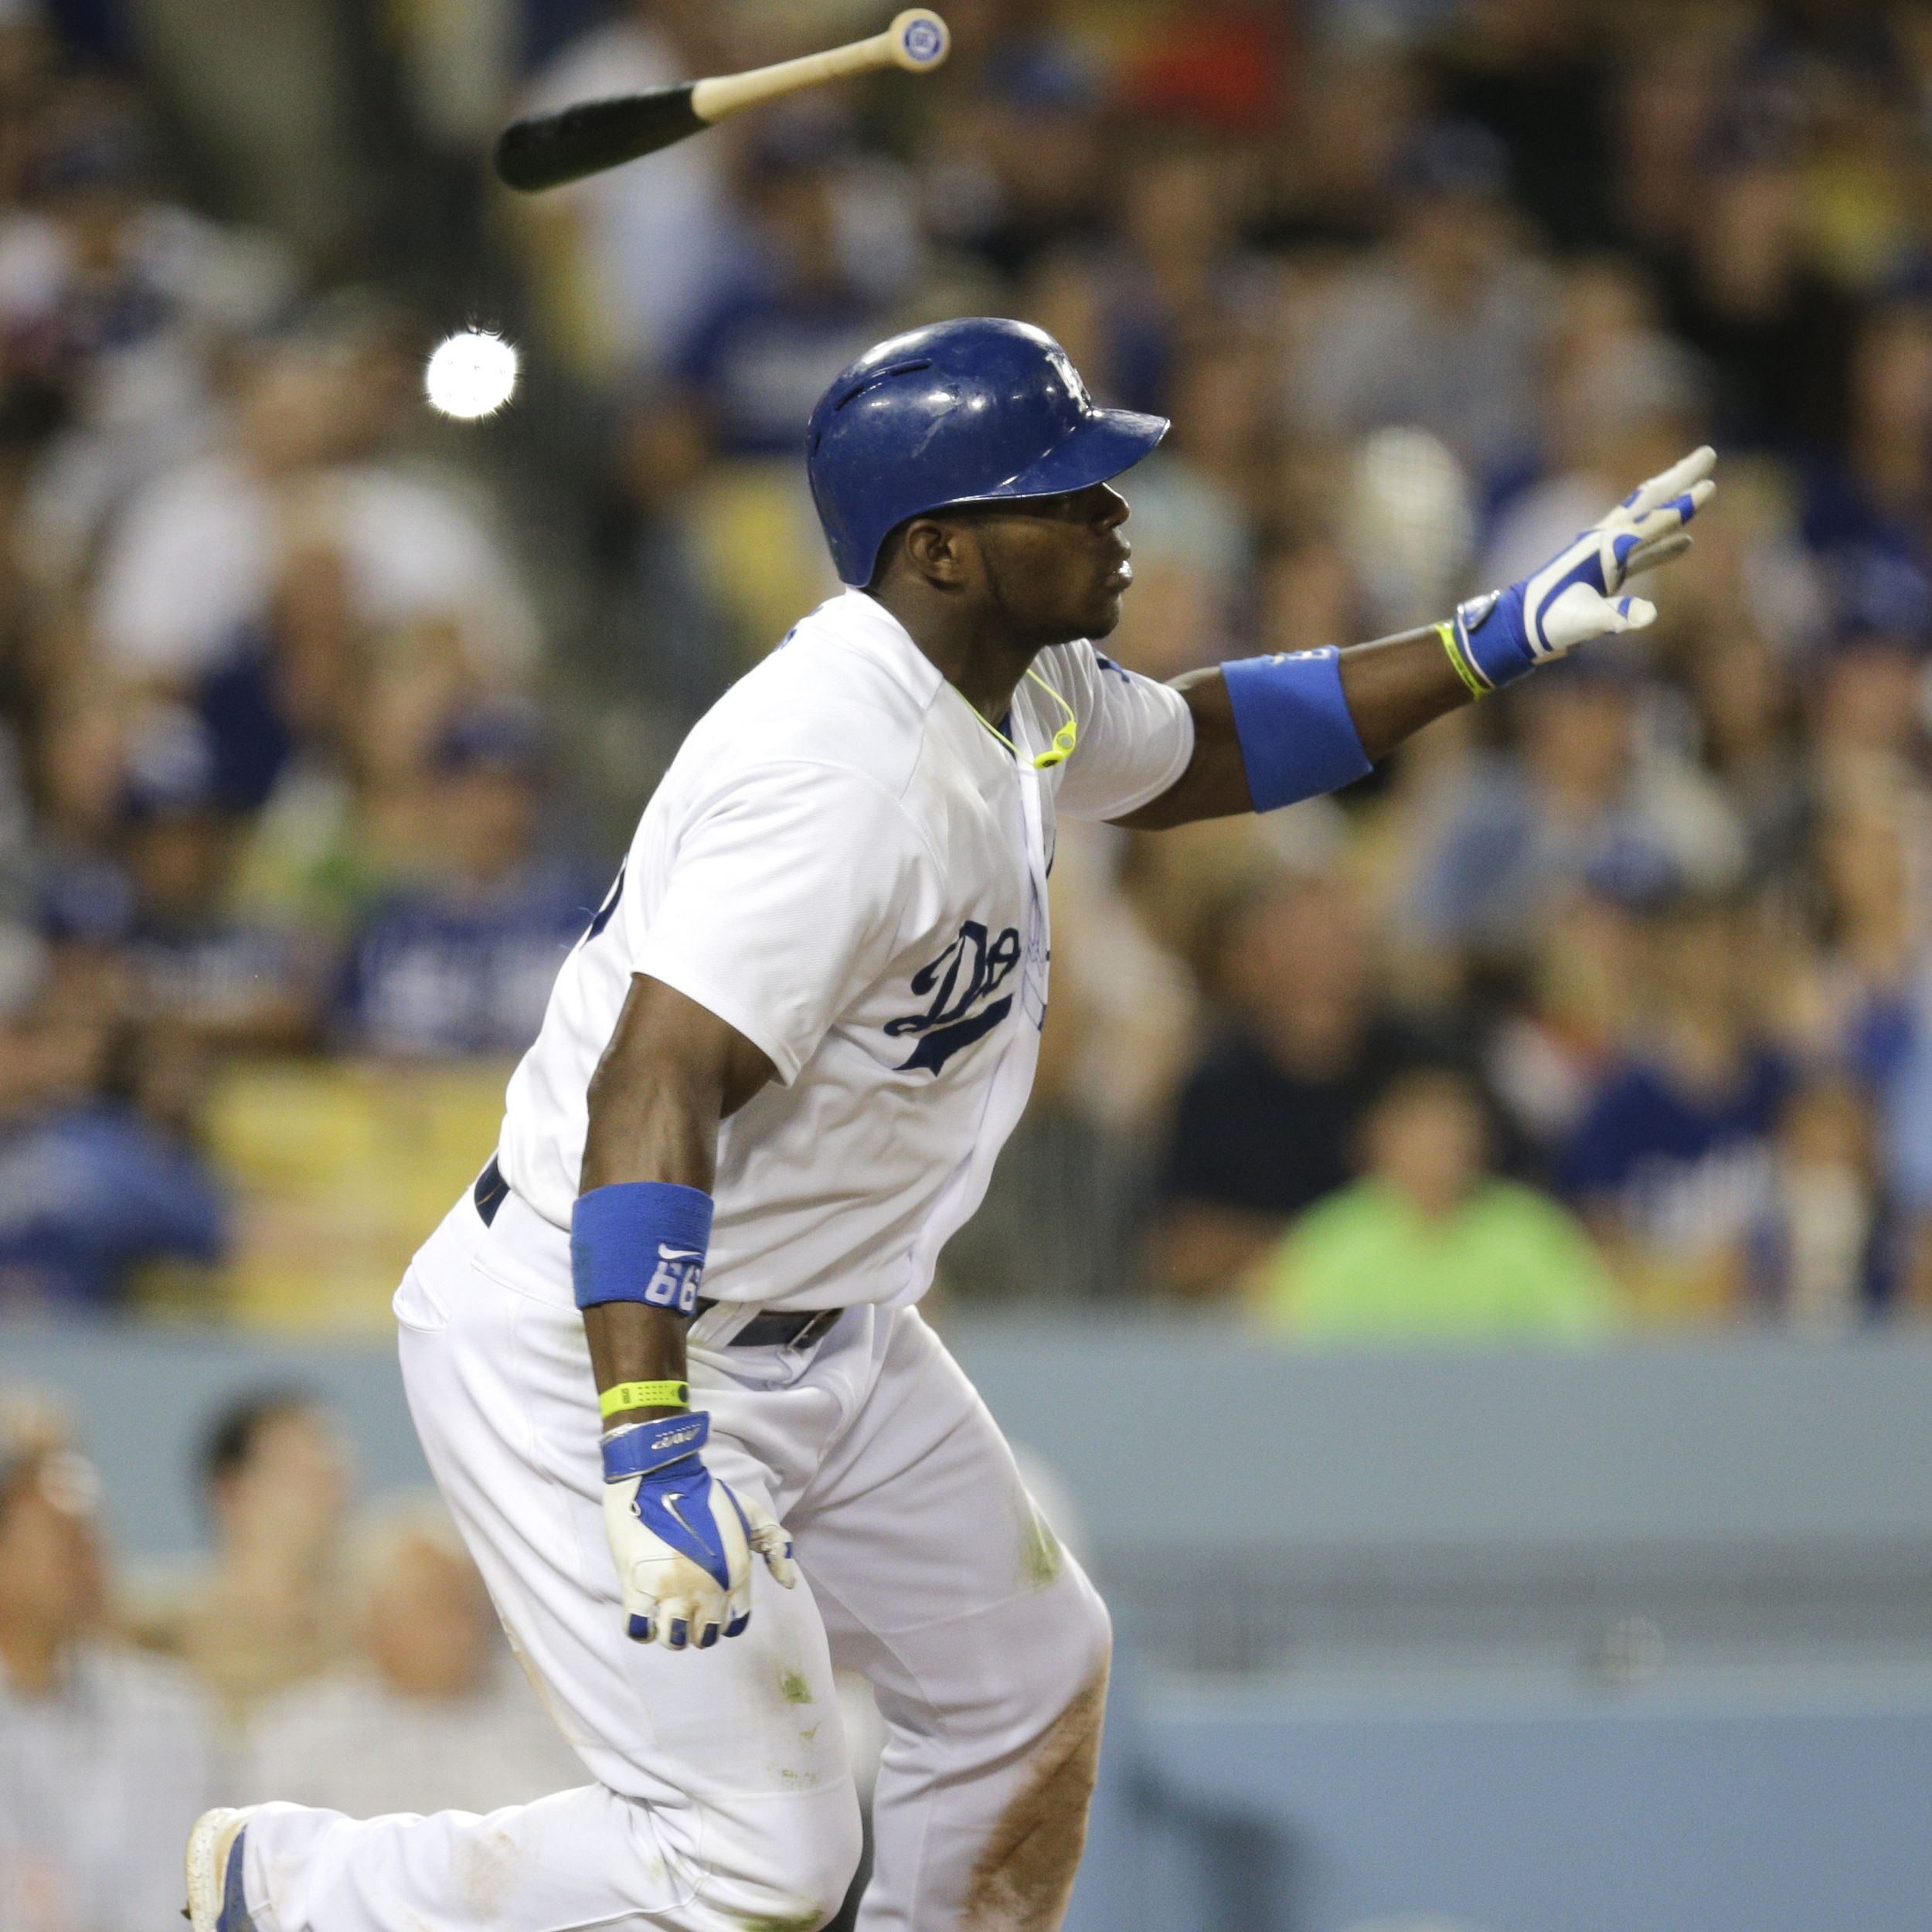 Dodgers signed Yasiel Puig for $42 million after only watching him